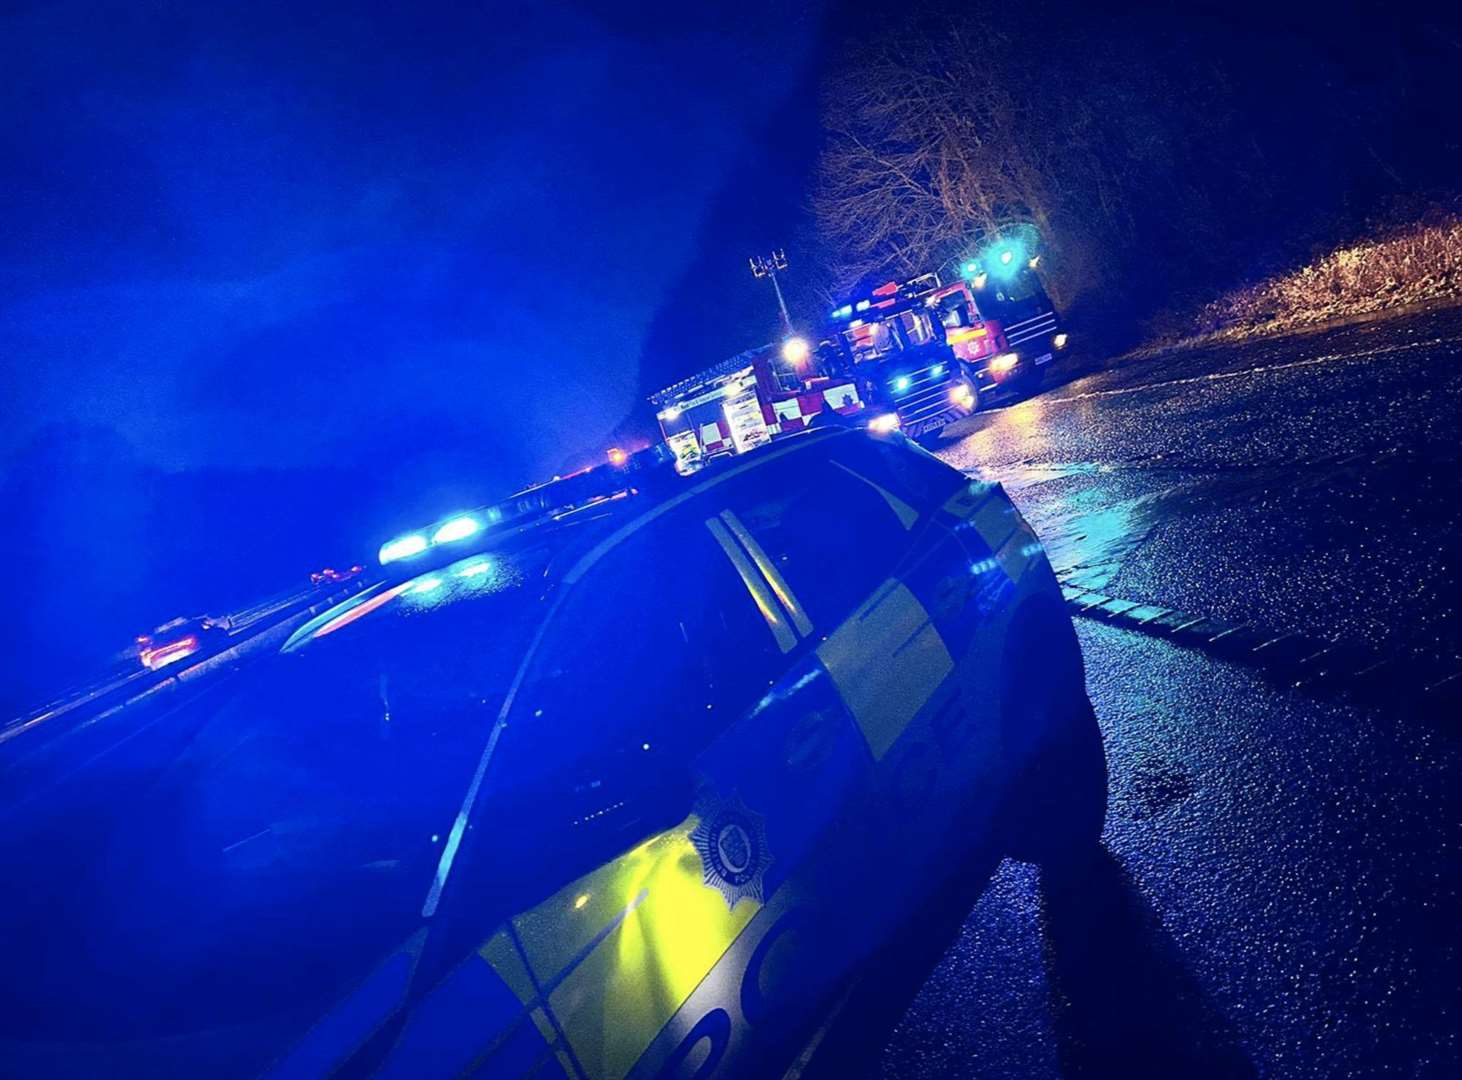 Police and fire crews were on scene at the vehicle fire on the M25 on February 9. Picture: BTP/Twitter